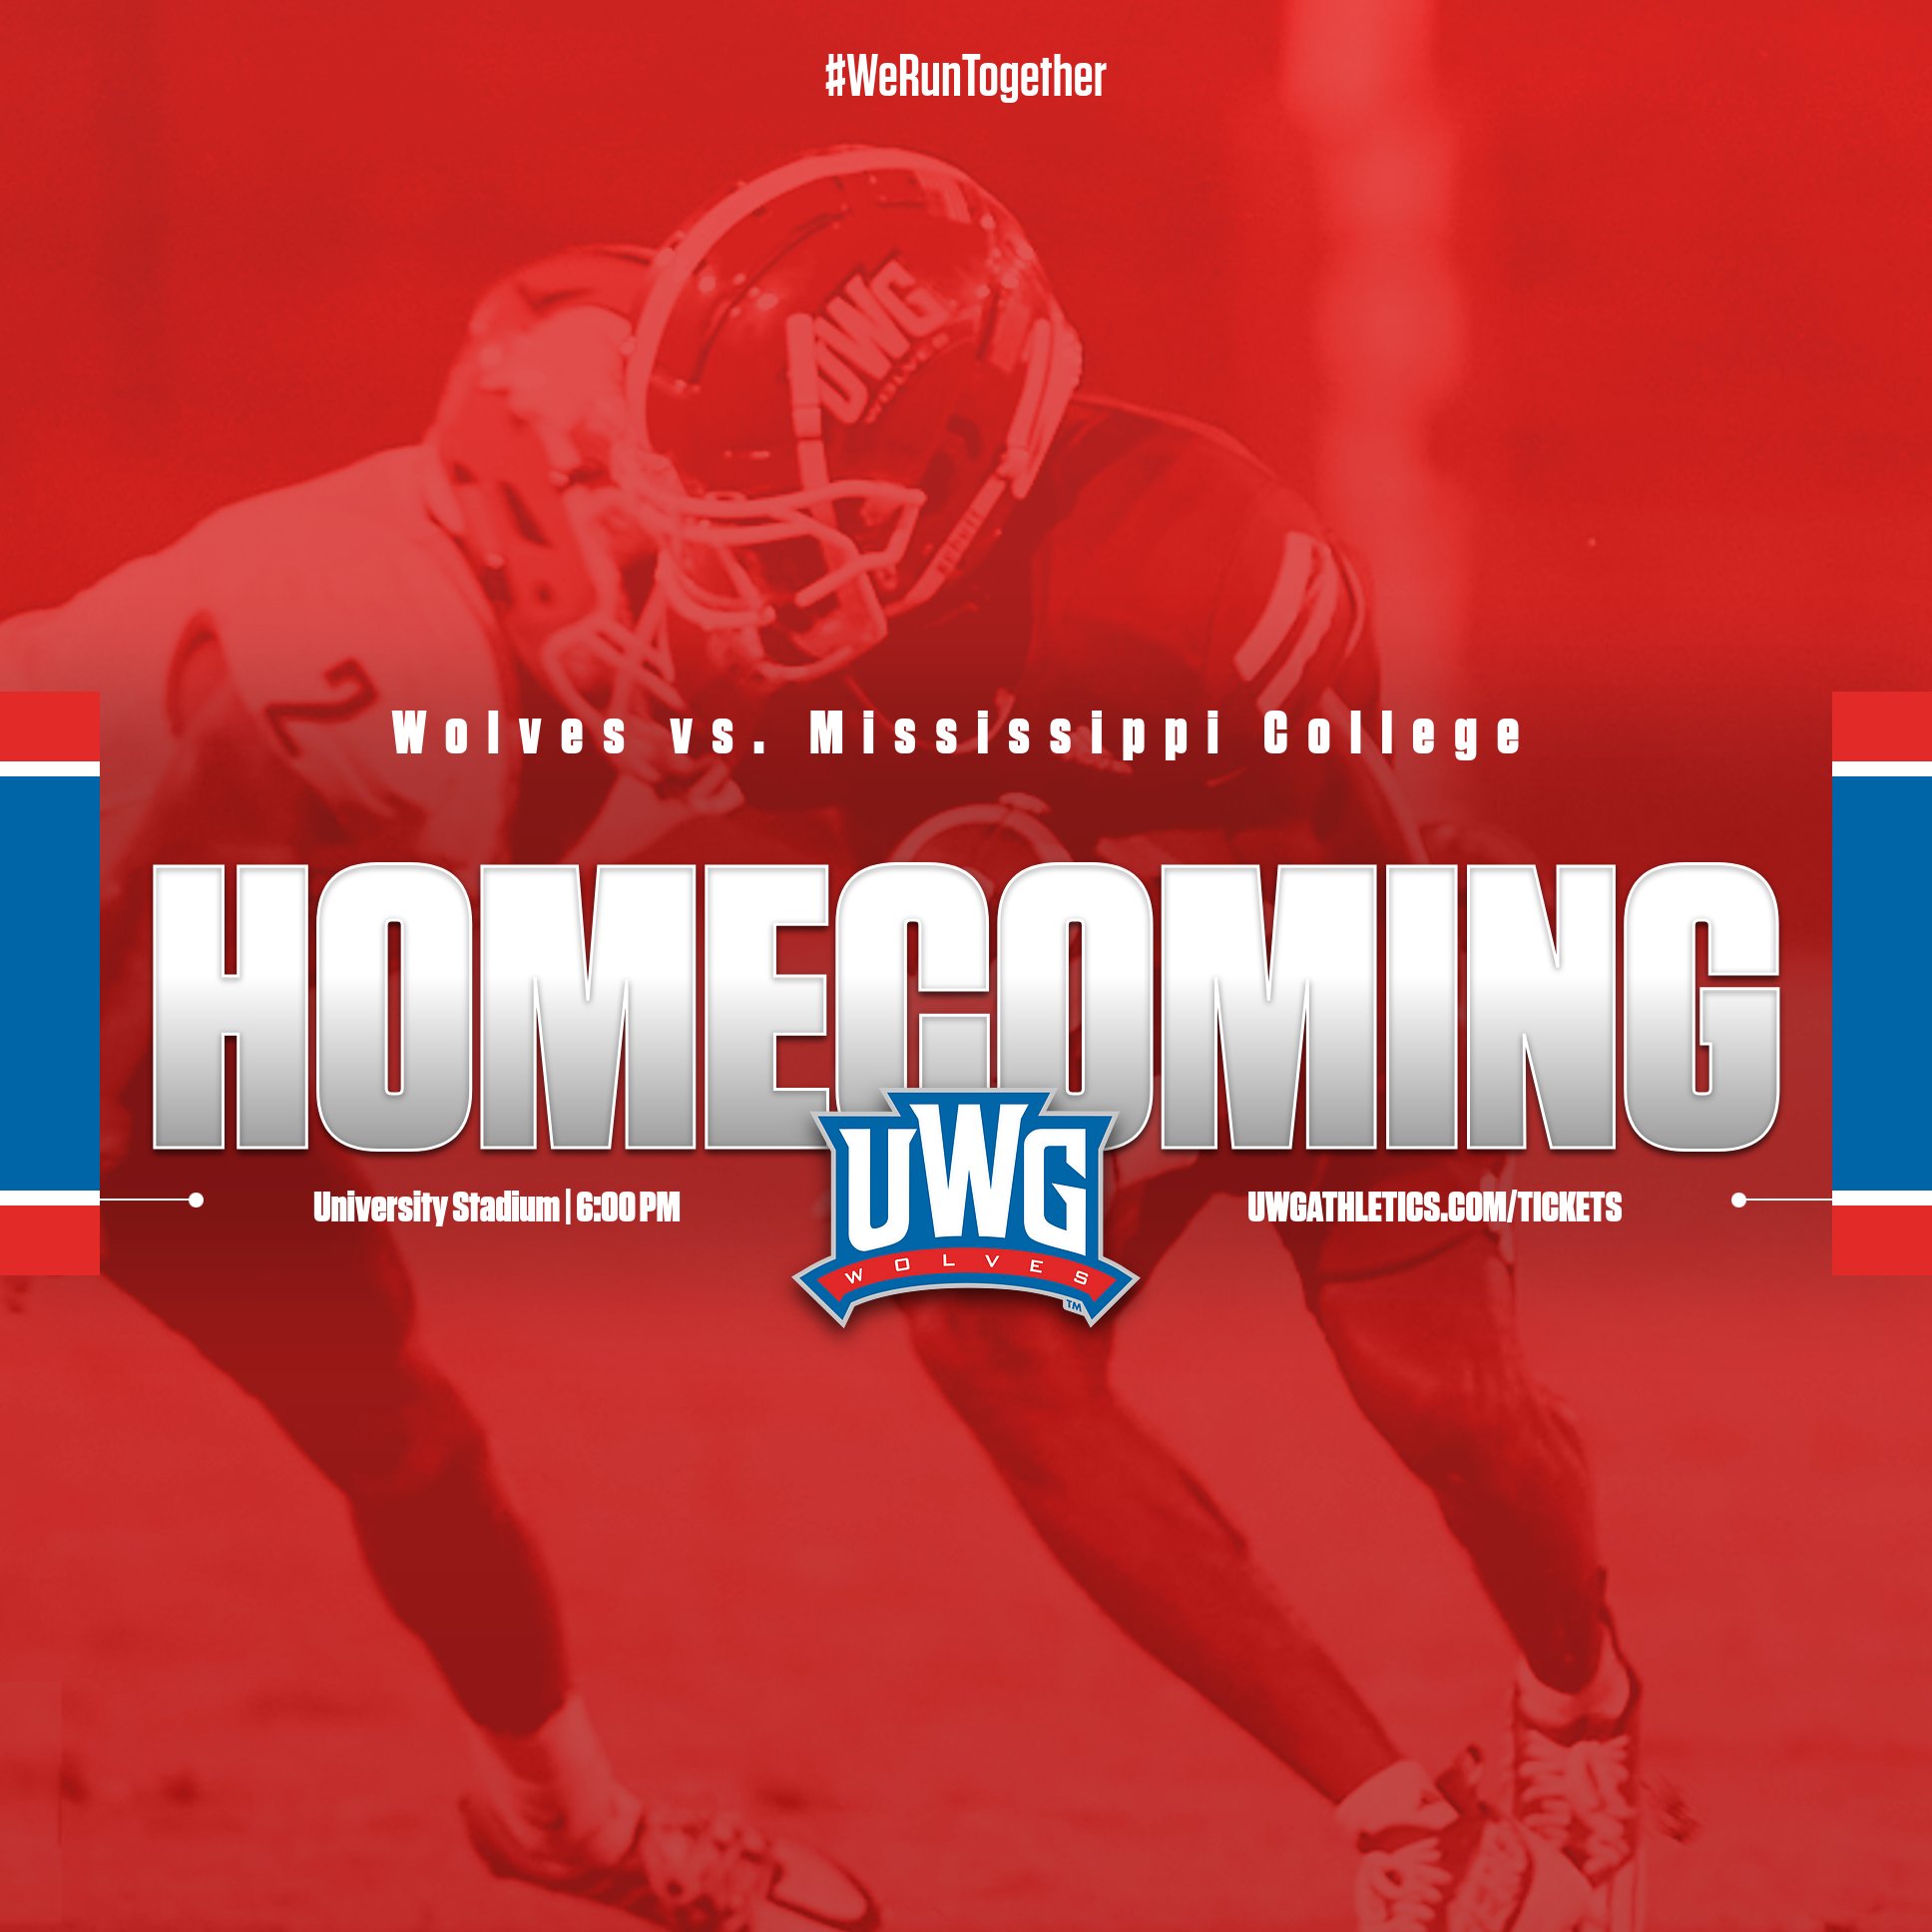 Homecoming banner, red background with homecoming and UWG wordmark across the center.